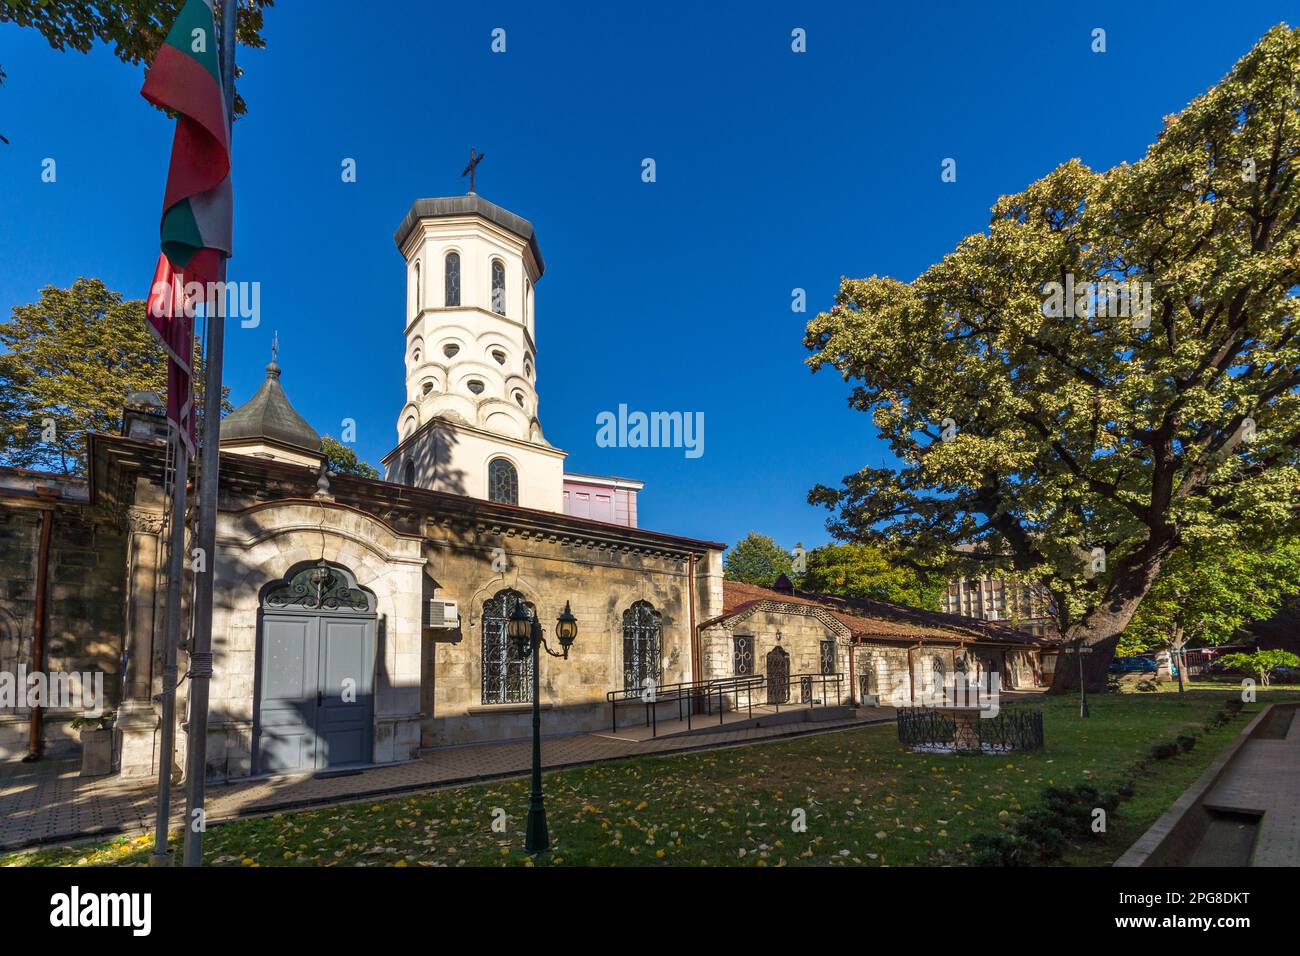 RUSE, BULGARIA -NOVEMBER 2, 2020: Typical Building and street at the center of city of Ruse, Bulgaria Stock Photo